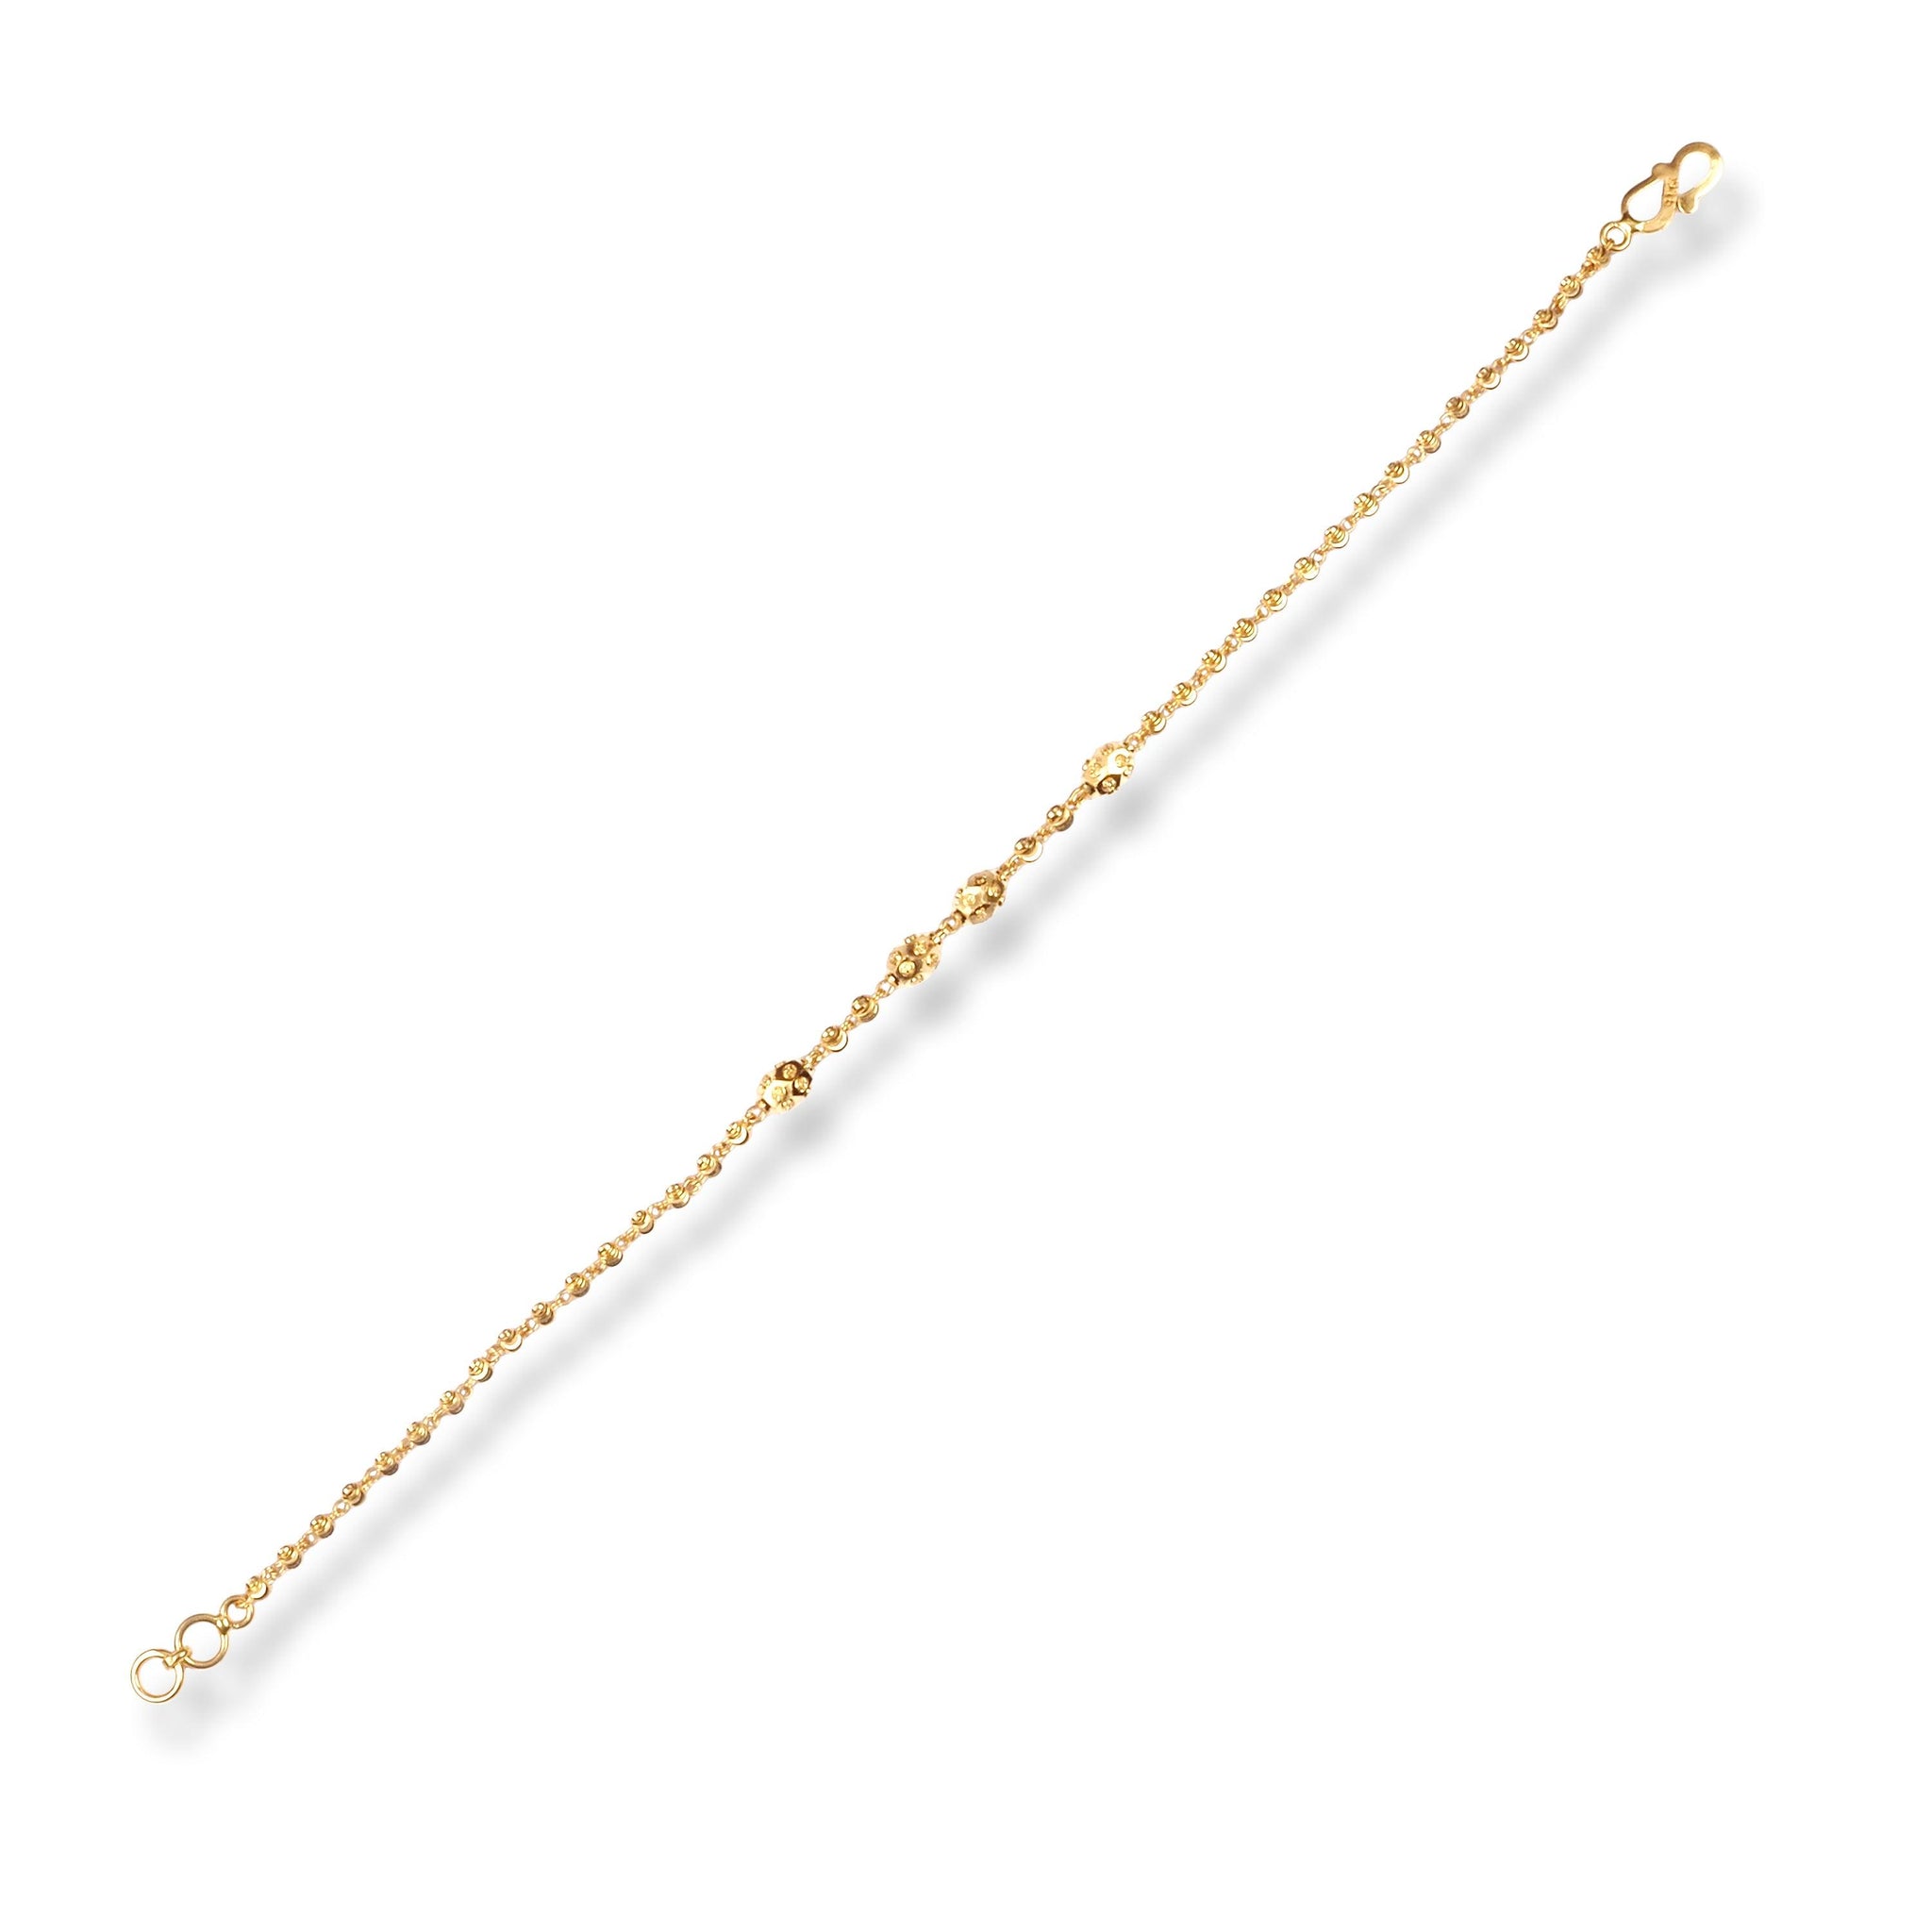 22ct Gold Ladies Bracelet with Oval Beads & S Clasp LBR-7155